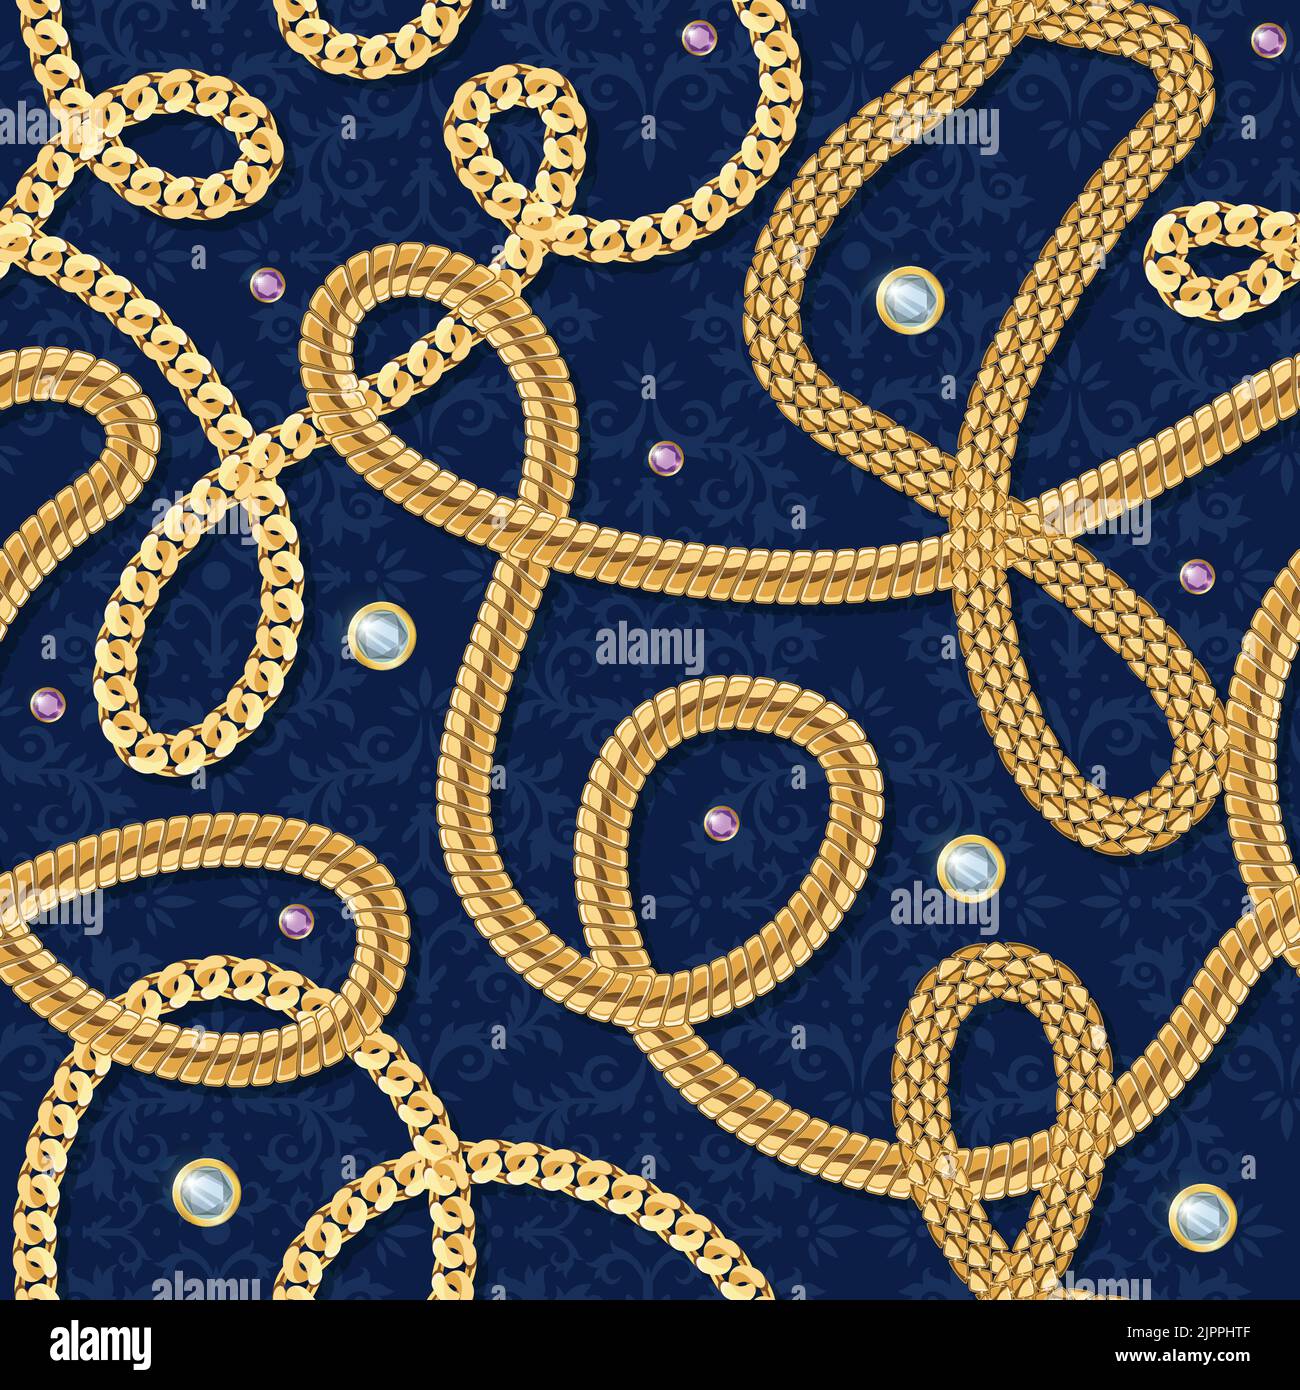 Gold chain seamless pattern with jewels on blue background realistic vector illustration Stock Vector